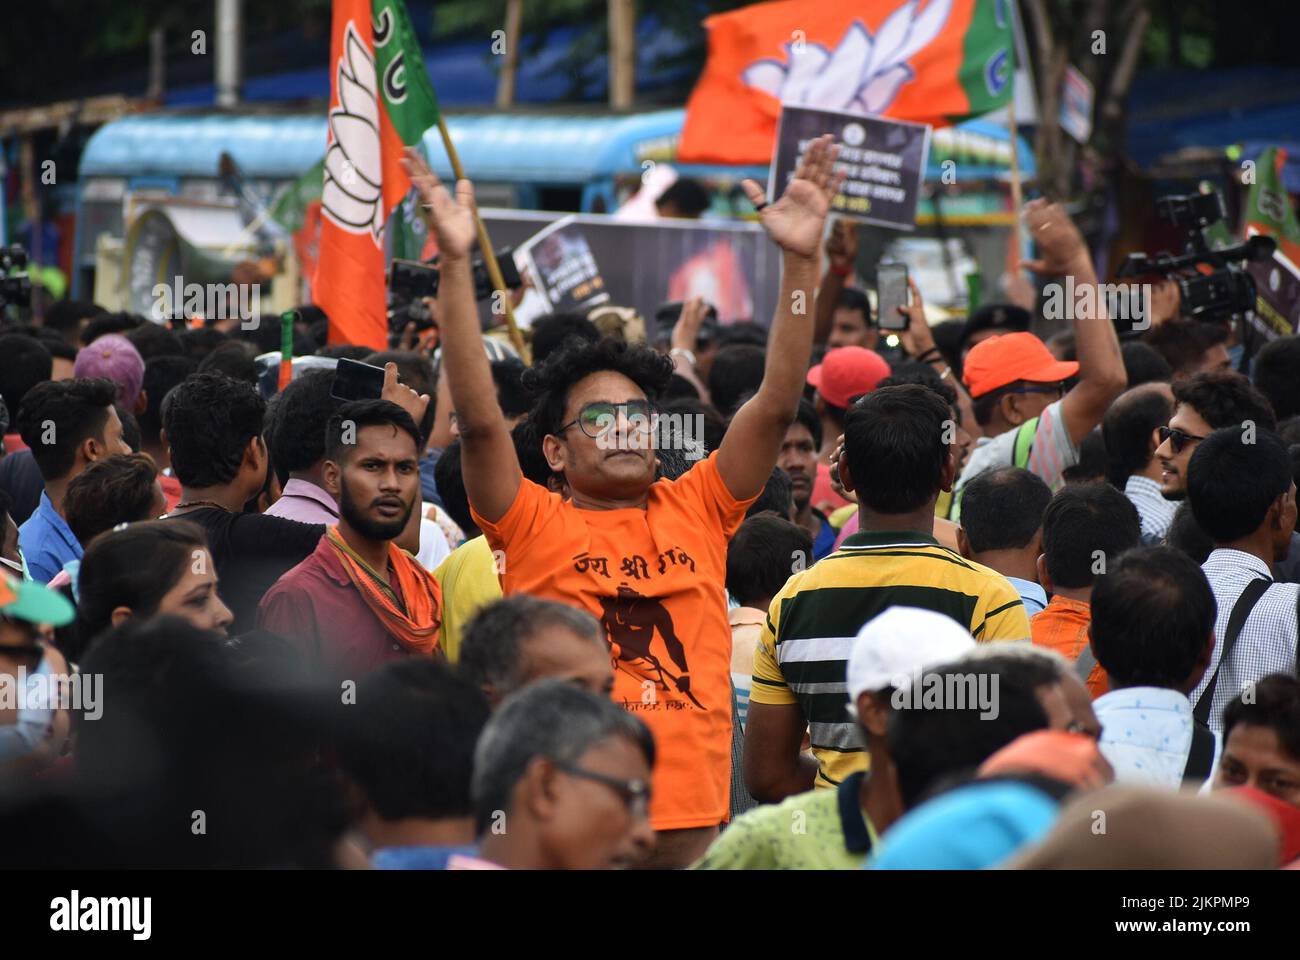 Kolkata, India. 11th Dec, 2018. BJP (Bharatiya Janata Party) protest against SSC (School Service Commission) corruption. Protesters demand swift and befitting punishment of the culprits and the resignation of the Chief Minister Mamata Banerjee. (Photo by Sayantan Chakraborty/Pacific Press/Sipa USA) Credit: Sipa USA/Alamy Live News Stock Photo